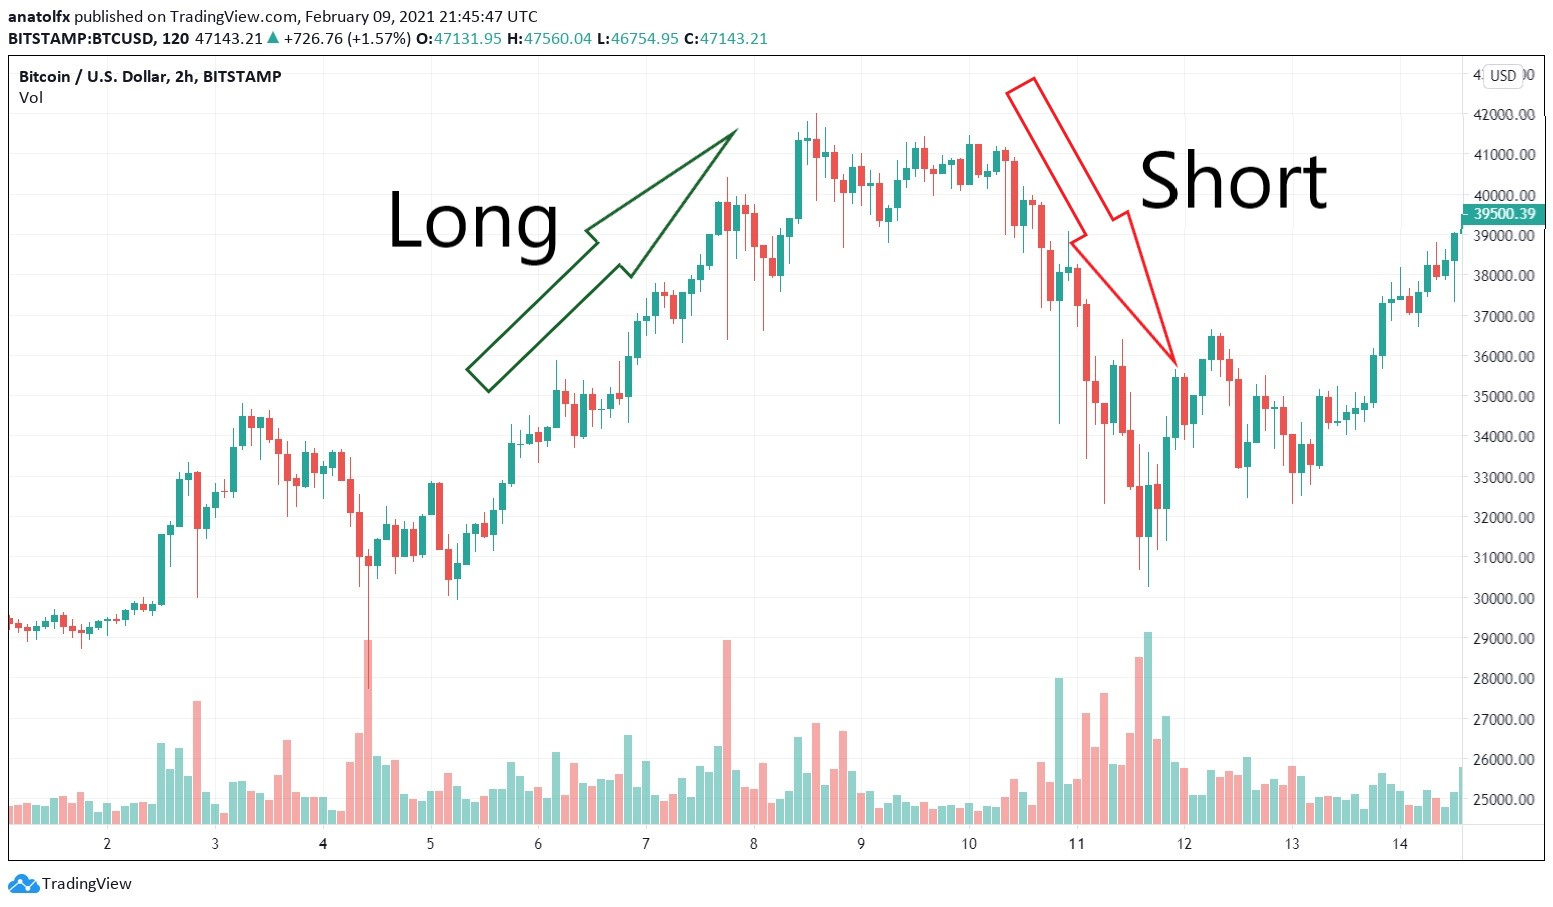 How to Short Sell Bitcoin - Guide for Begginers With 5 Ways to Short Crypto